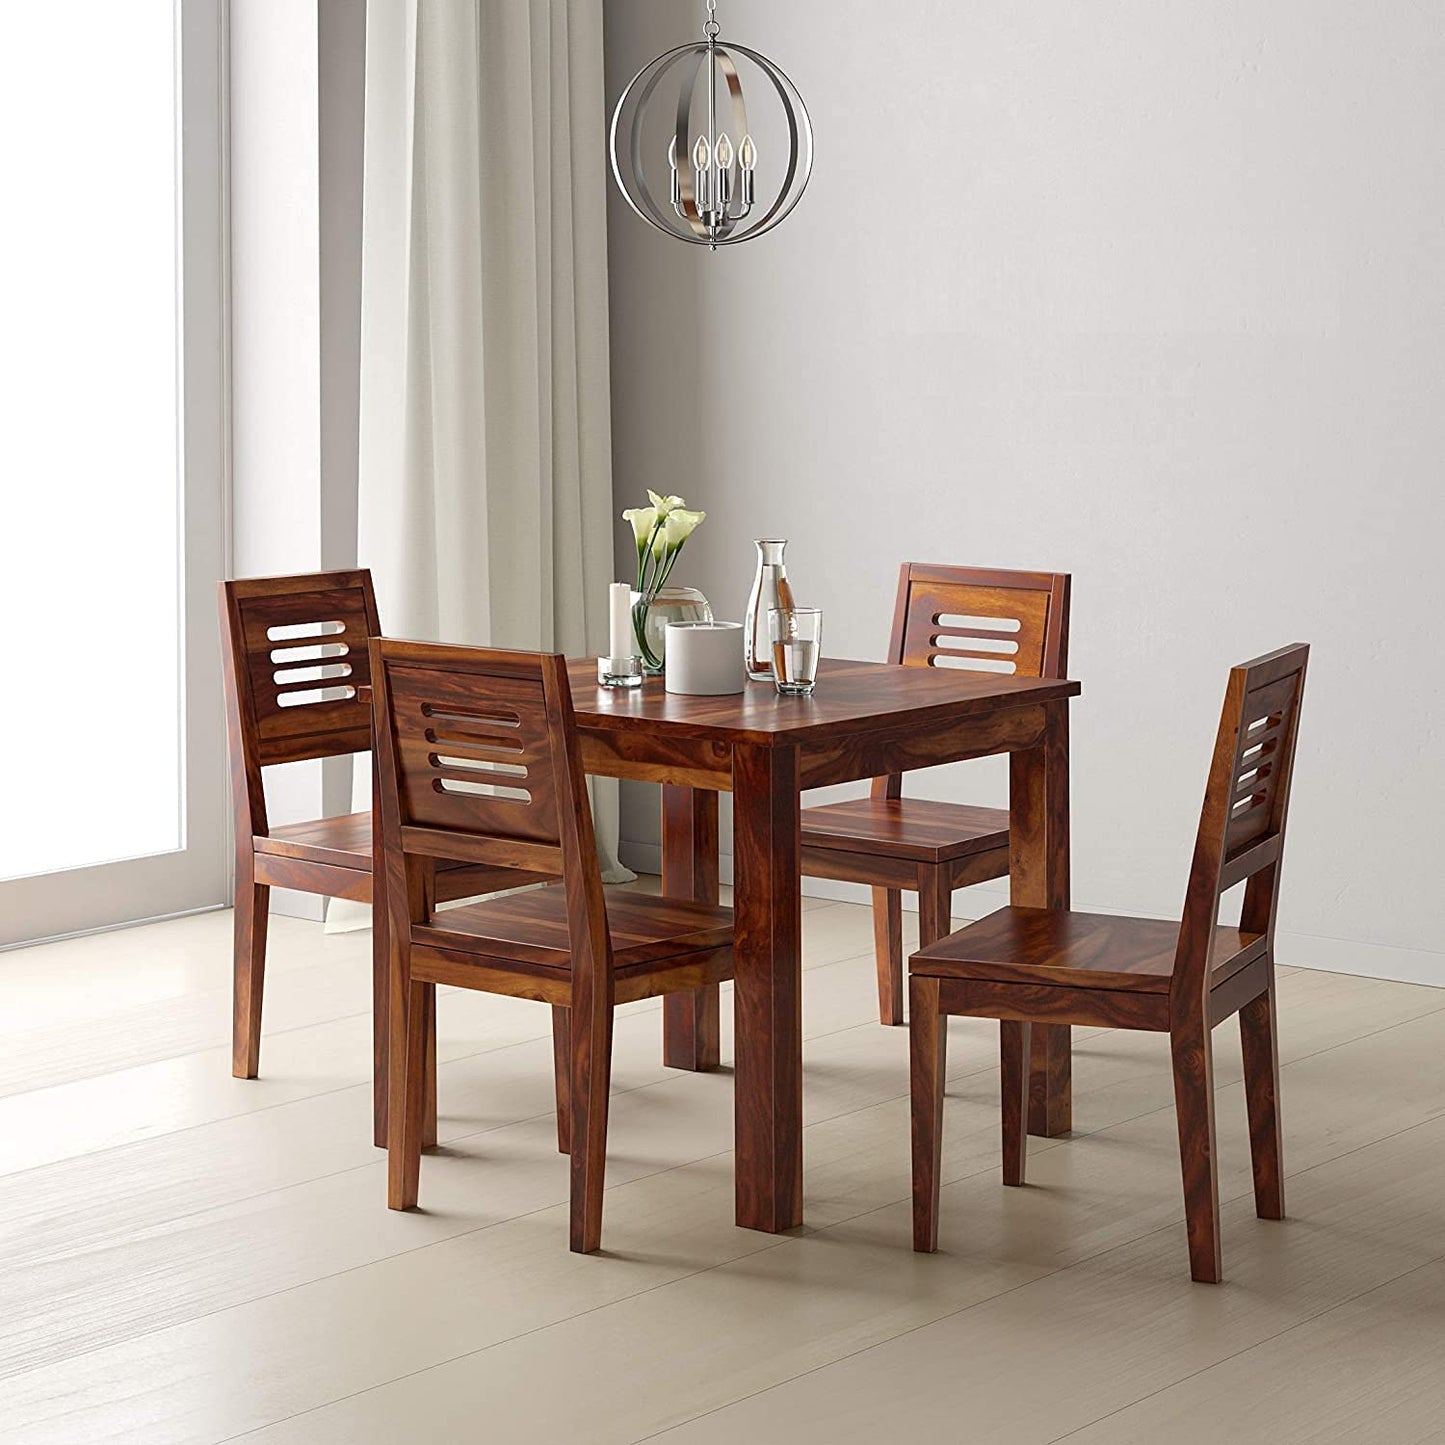 MoonWooden Solid Wood Dining Table with 4 Chair | for Home | Dining Room Furniture | Natural Colour Finish